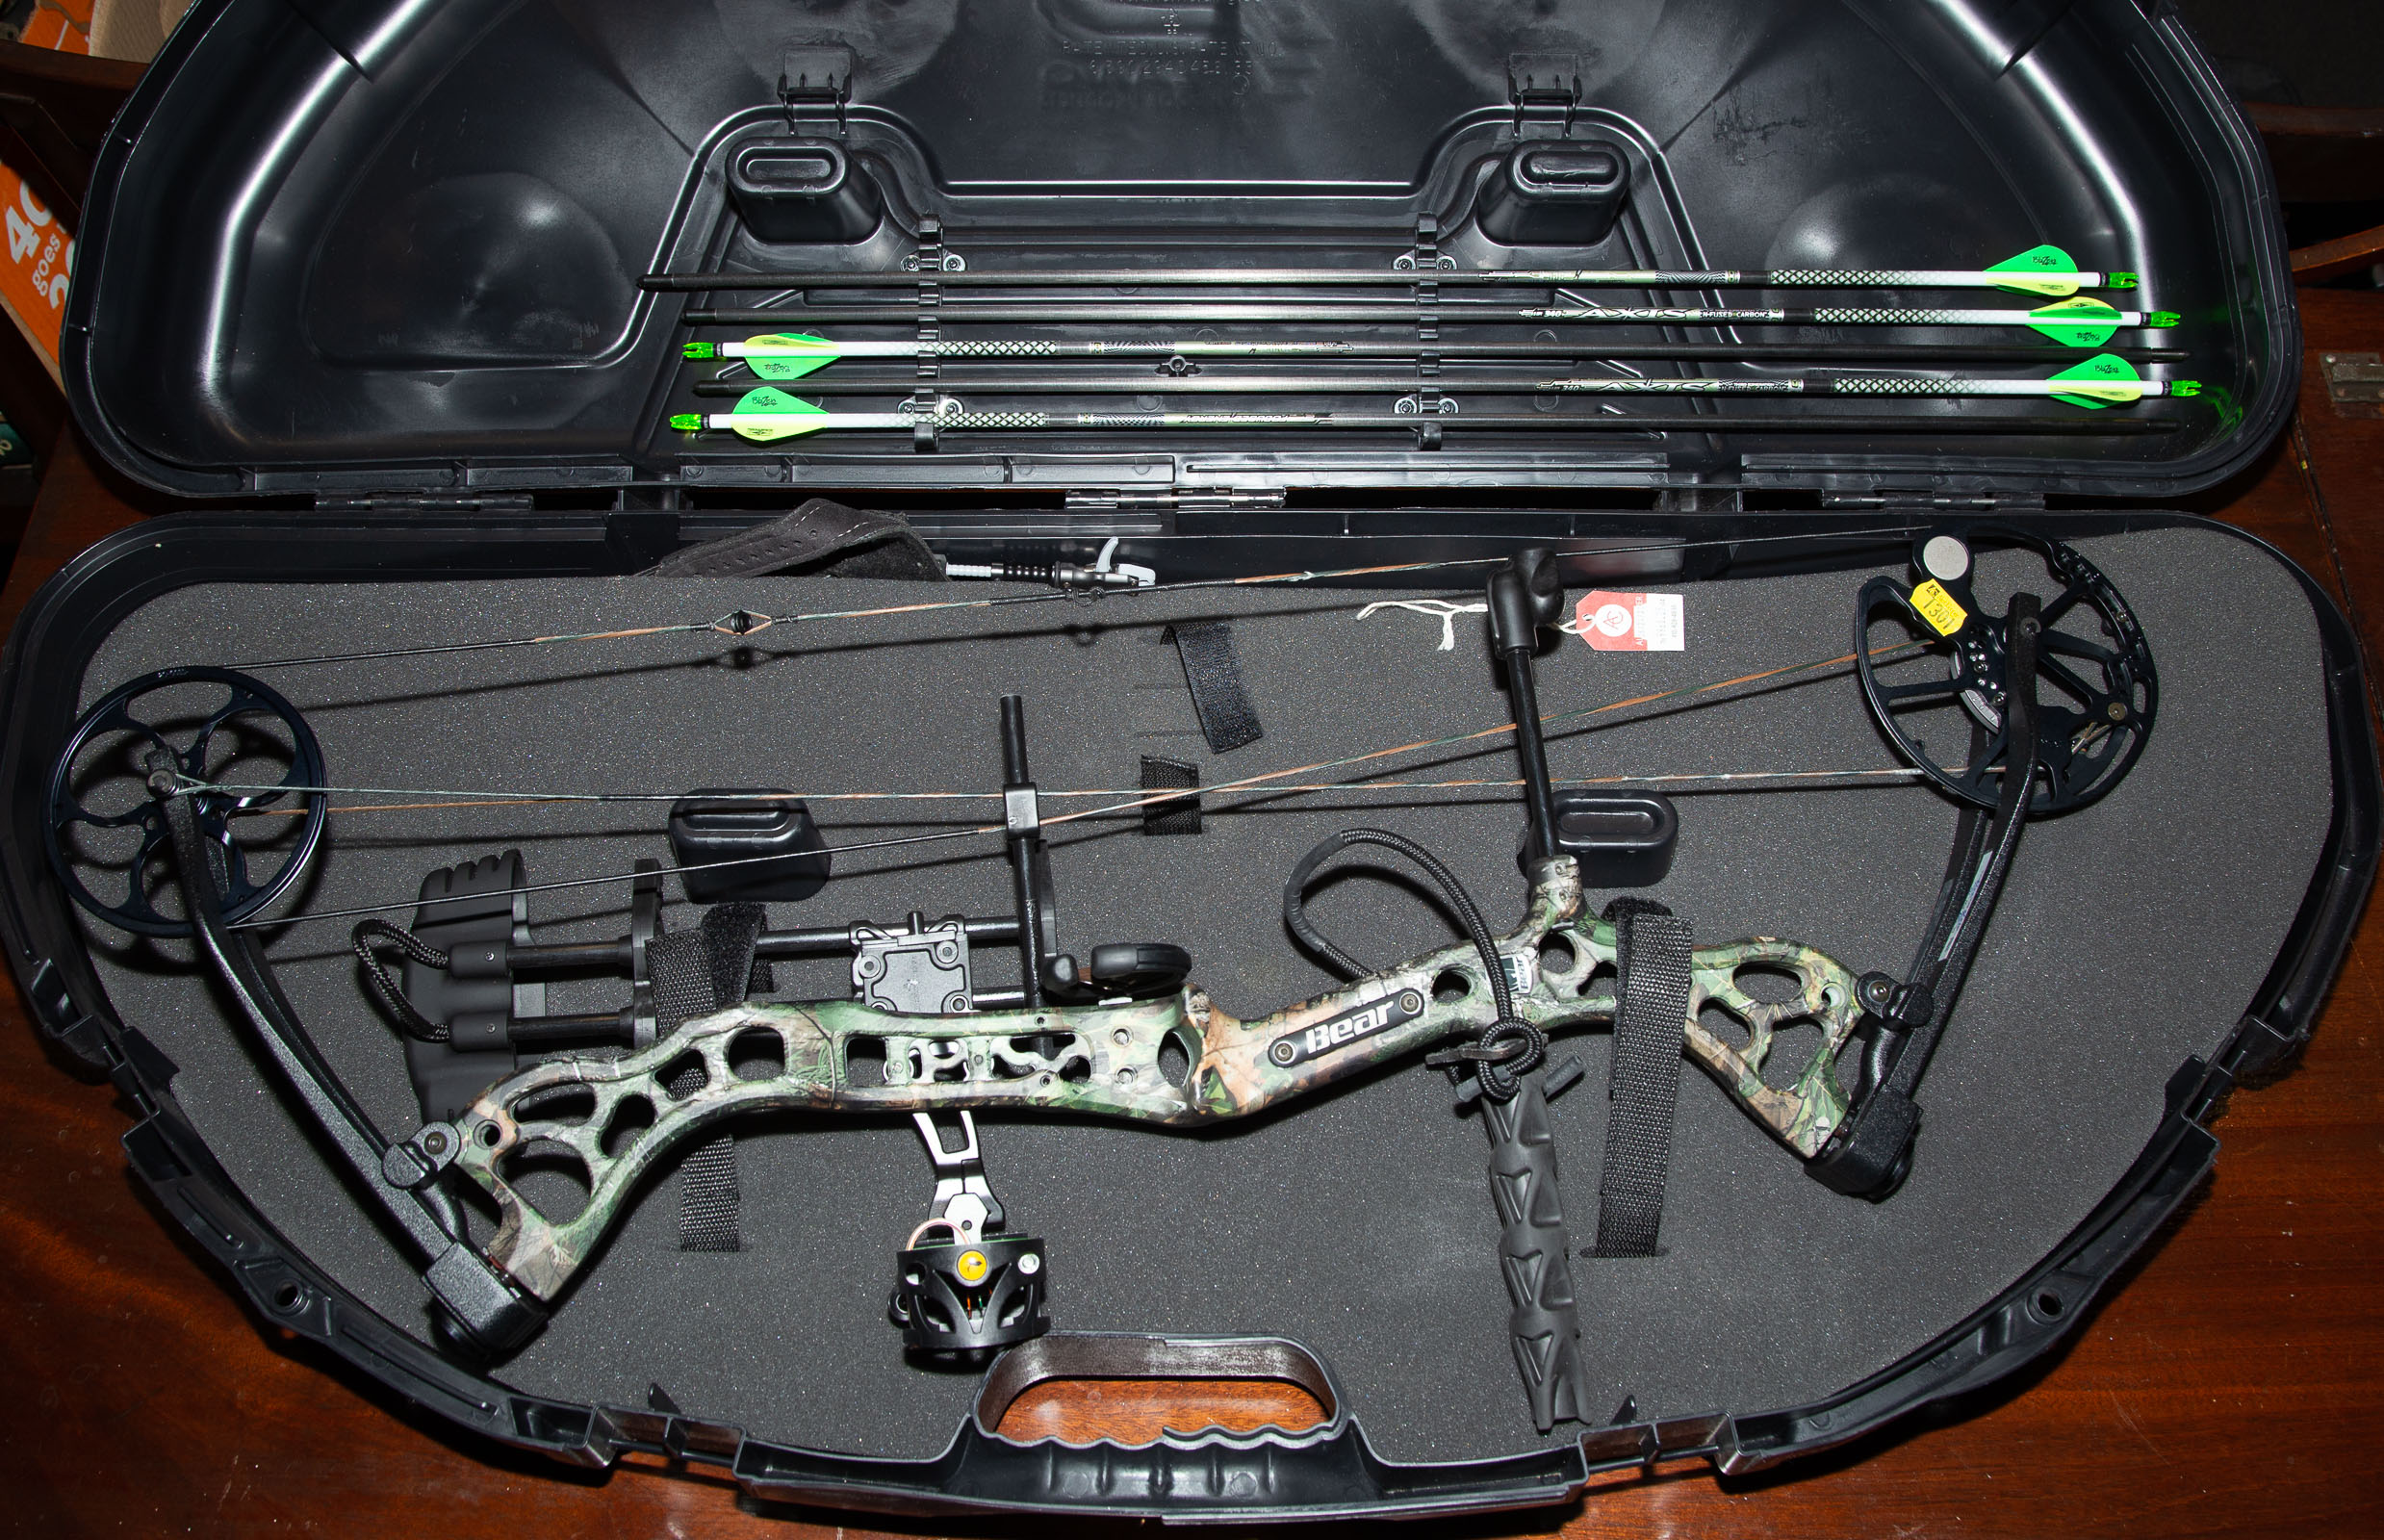 BEAR COMPOUND HUNTING BOW With LED sight,